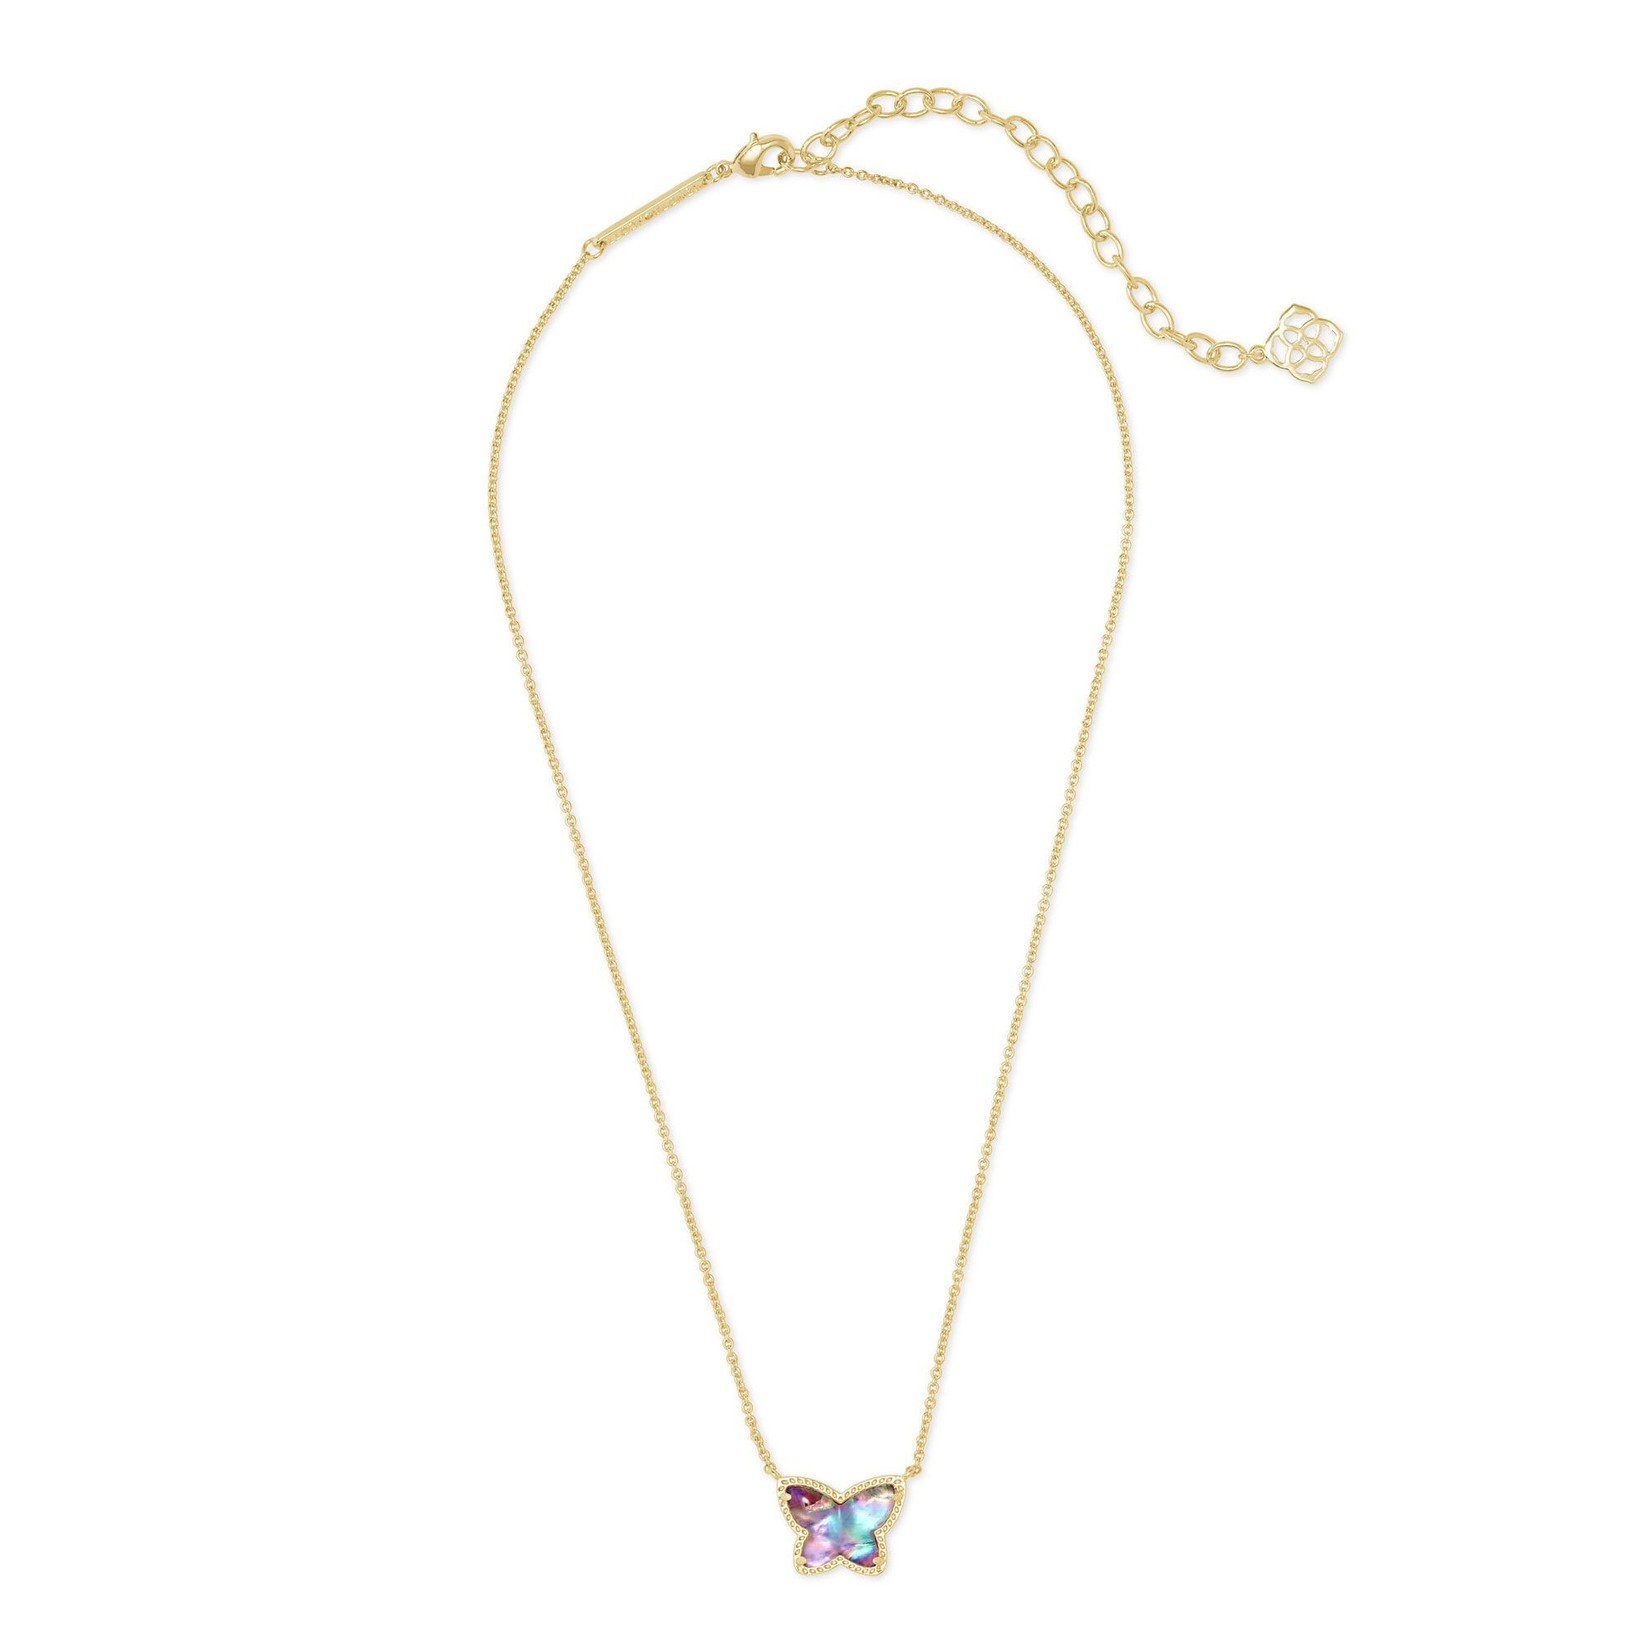 The Lillia Butterfly Pendant Necklace